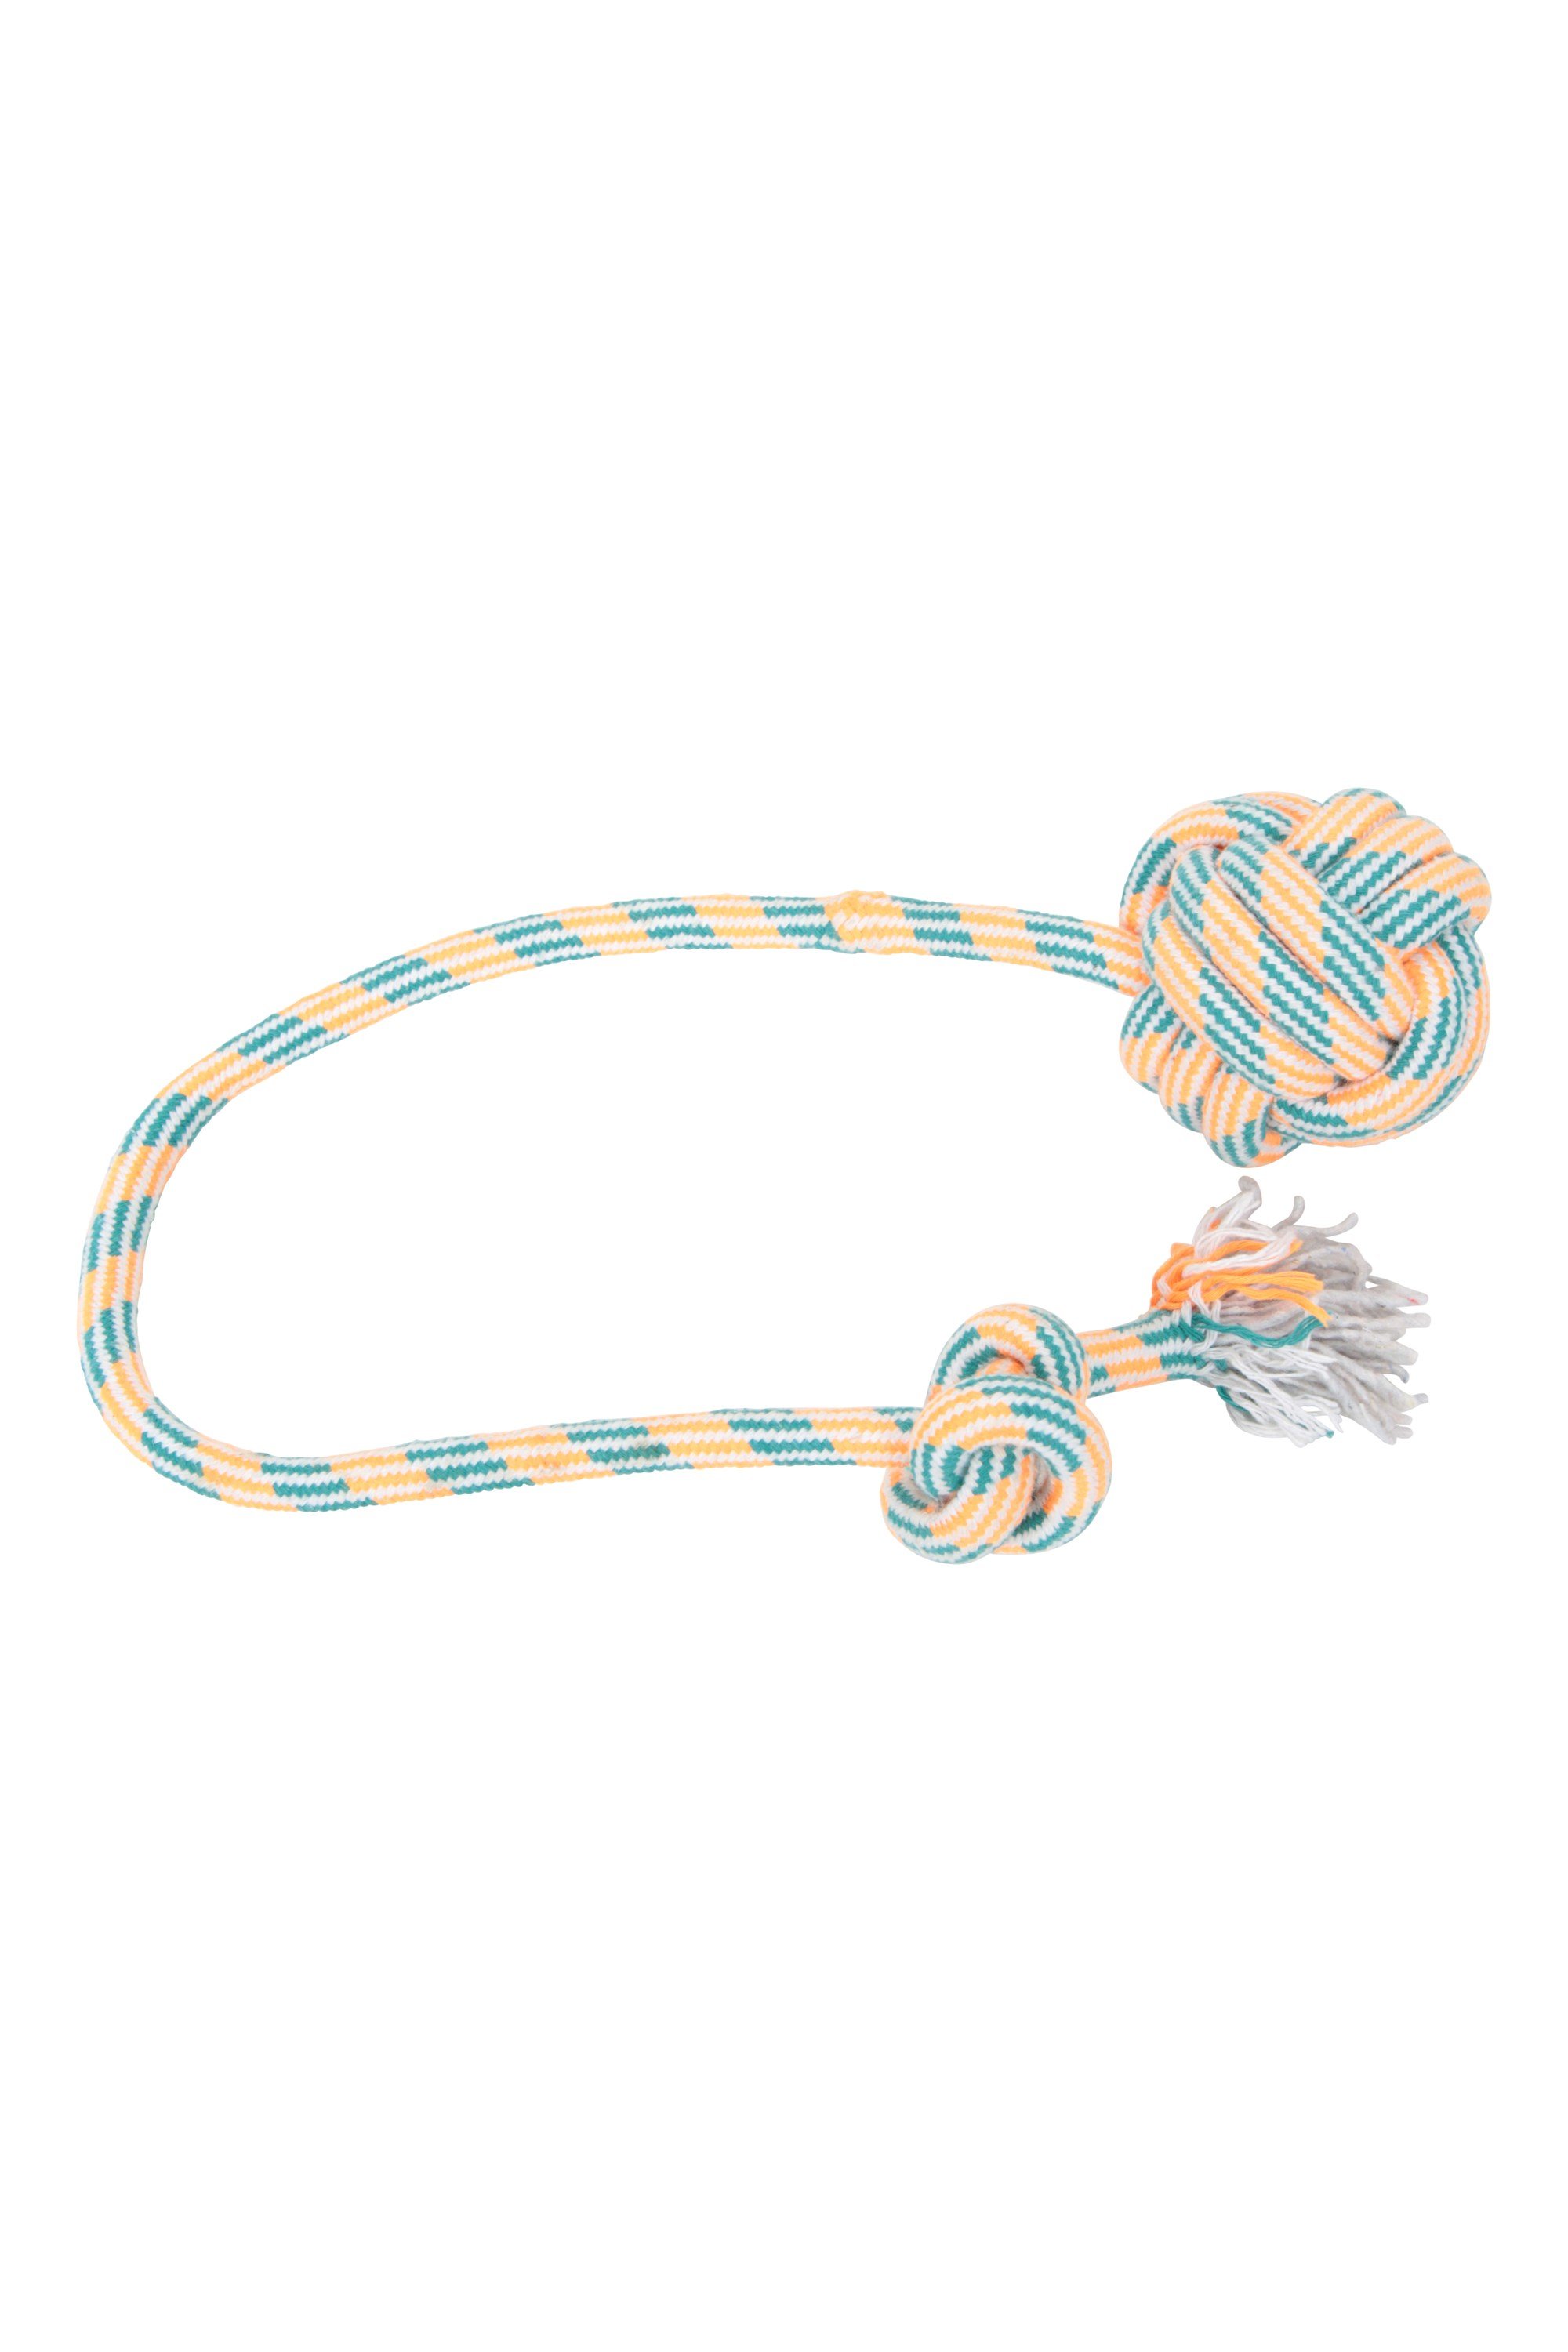 Rope Puller Pet Toy - Blue